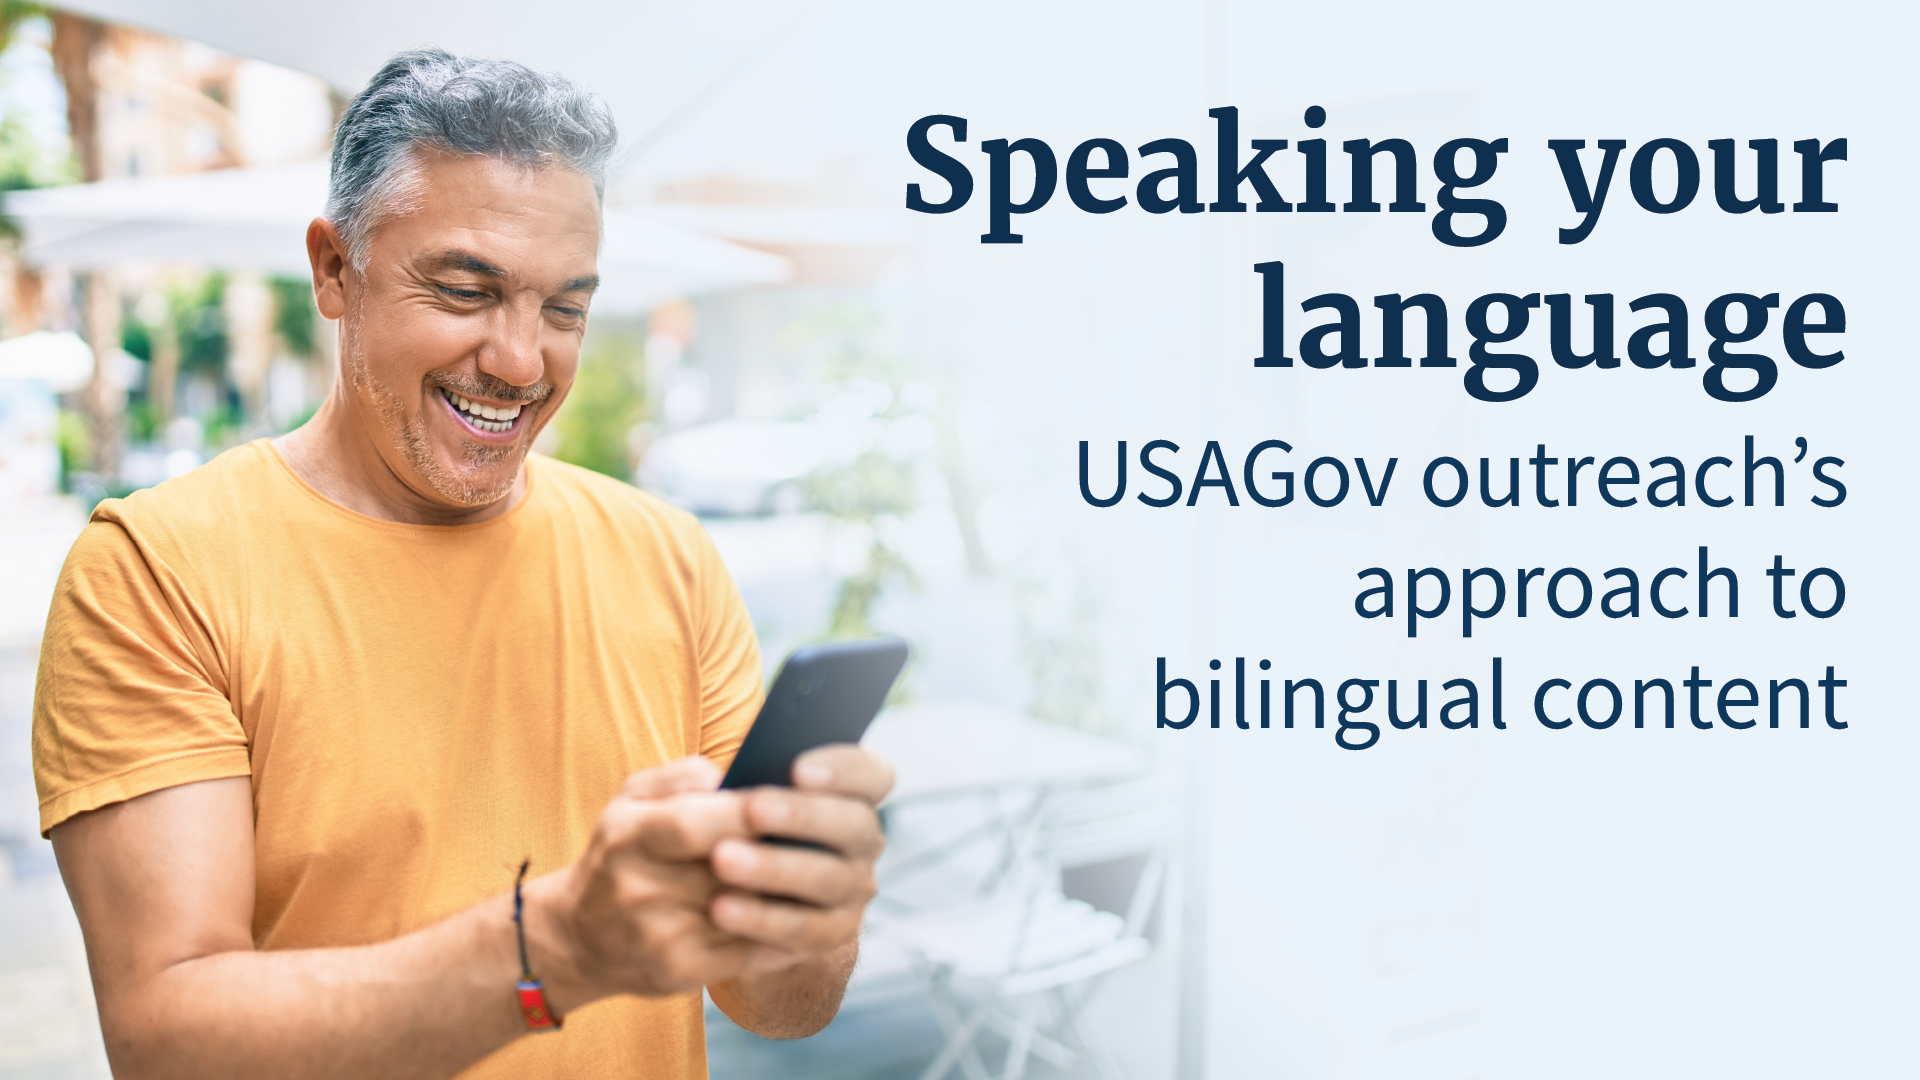 Speaking your language: USAGov outreach’s approach to bilingual content